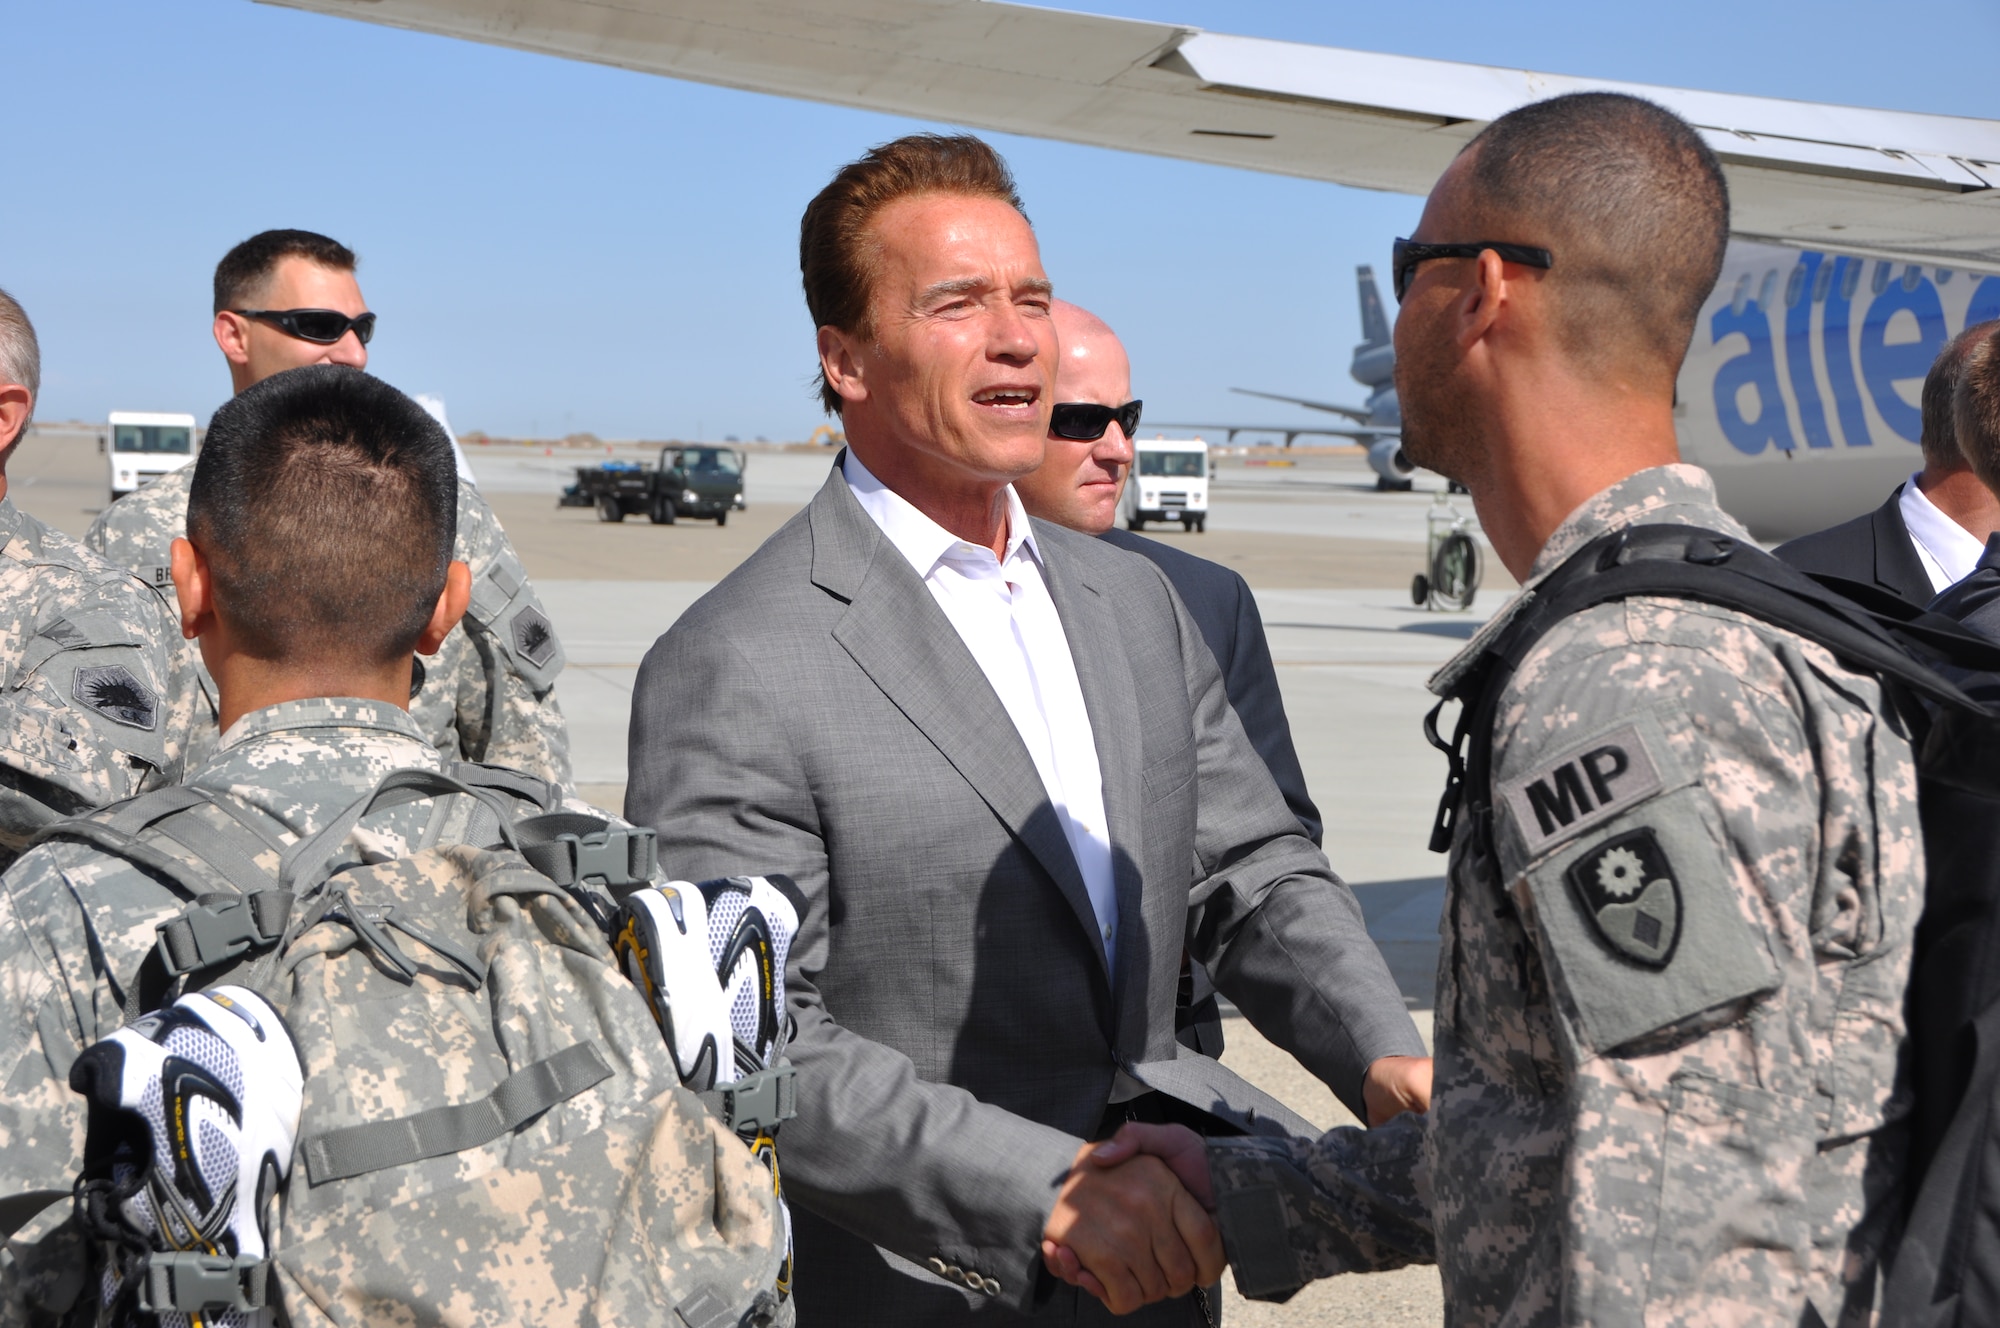 California Gov. Arnold Schwarzenegger greets military members of the 49th Military Police Brigade as they arrive on the flightline at Travis Aug. 10.(U.S. Air Force photo/ Staff Sgt. Patrick Harrower)